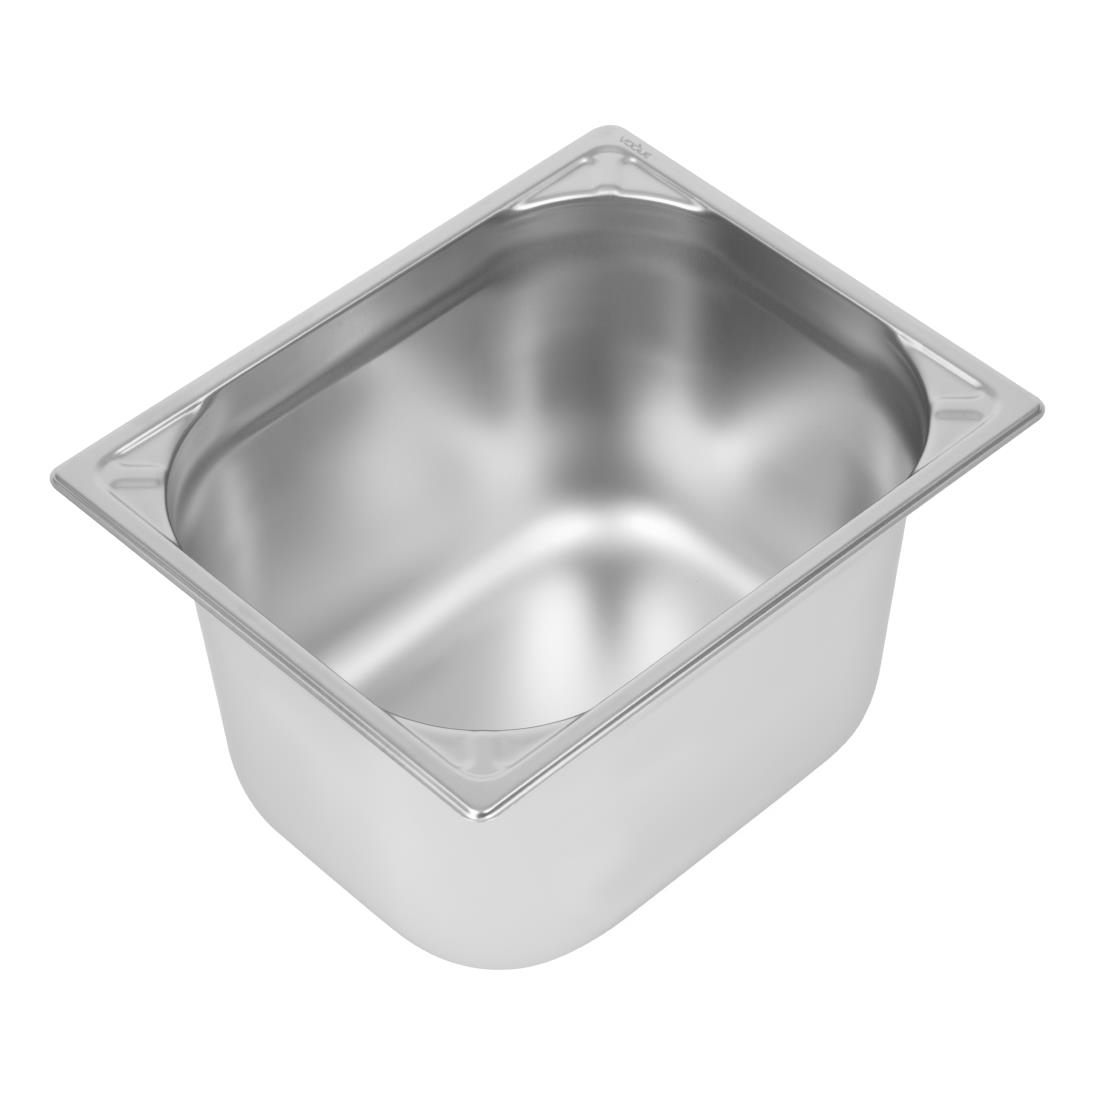 Vogue Heavy Duty Stainless Steel 1/2 Gastronorm Pan 200mm